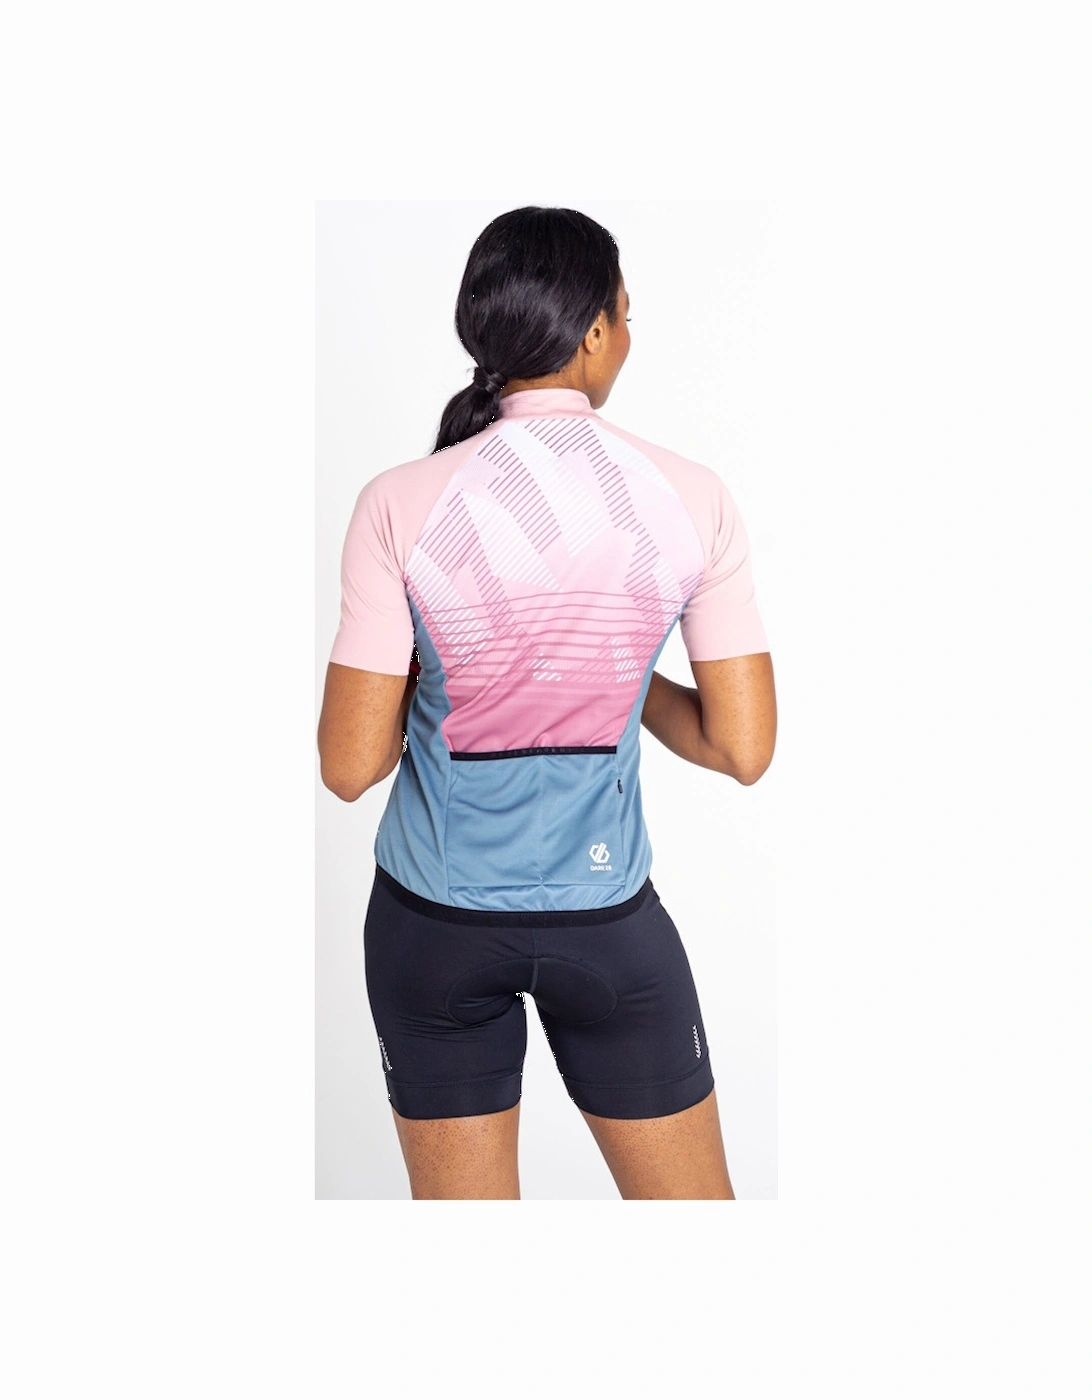 Womens AEP Prompt Reflective Cycling Jersey Top